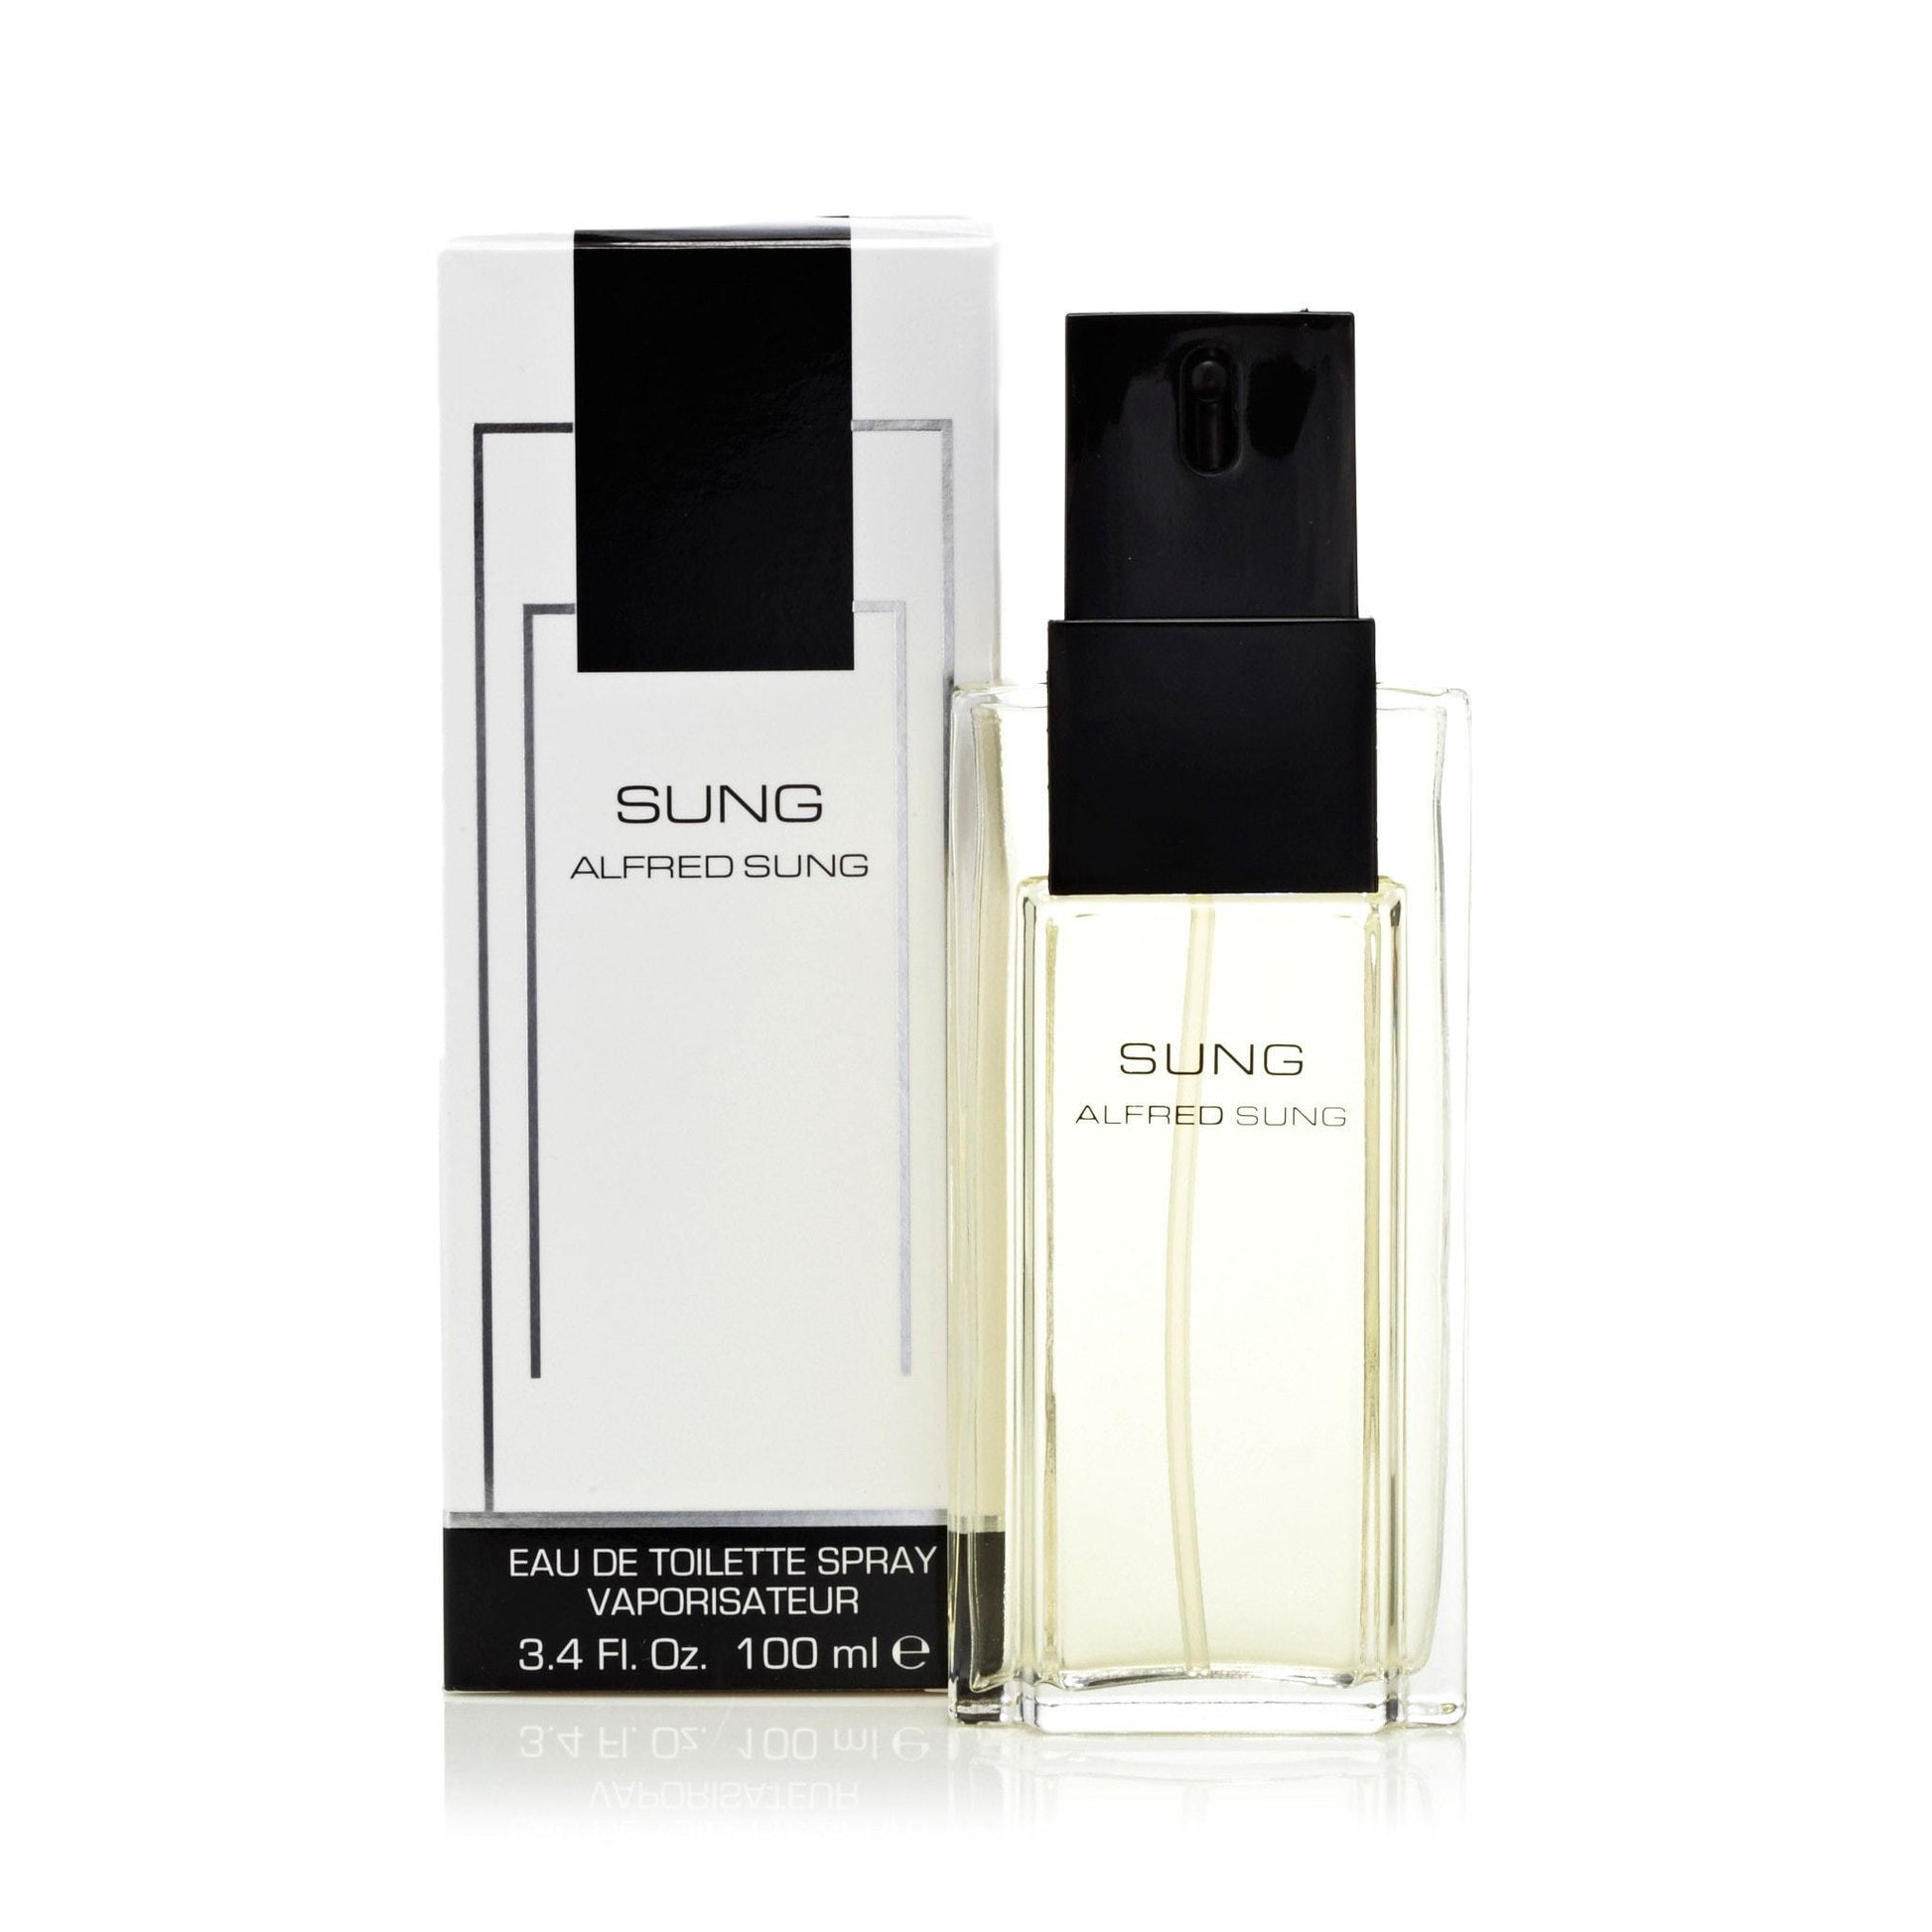 Alfred Sung Eau de Toilette Spray for Women by Alfred Sung, Product image 7